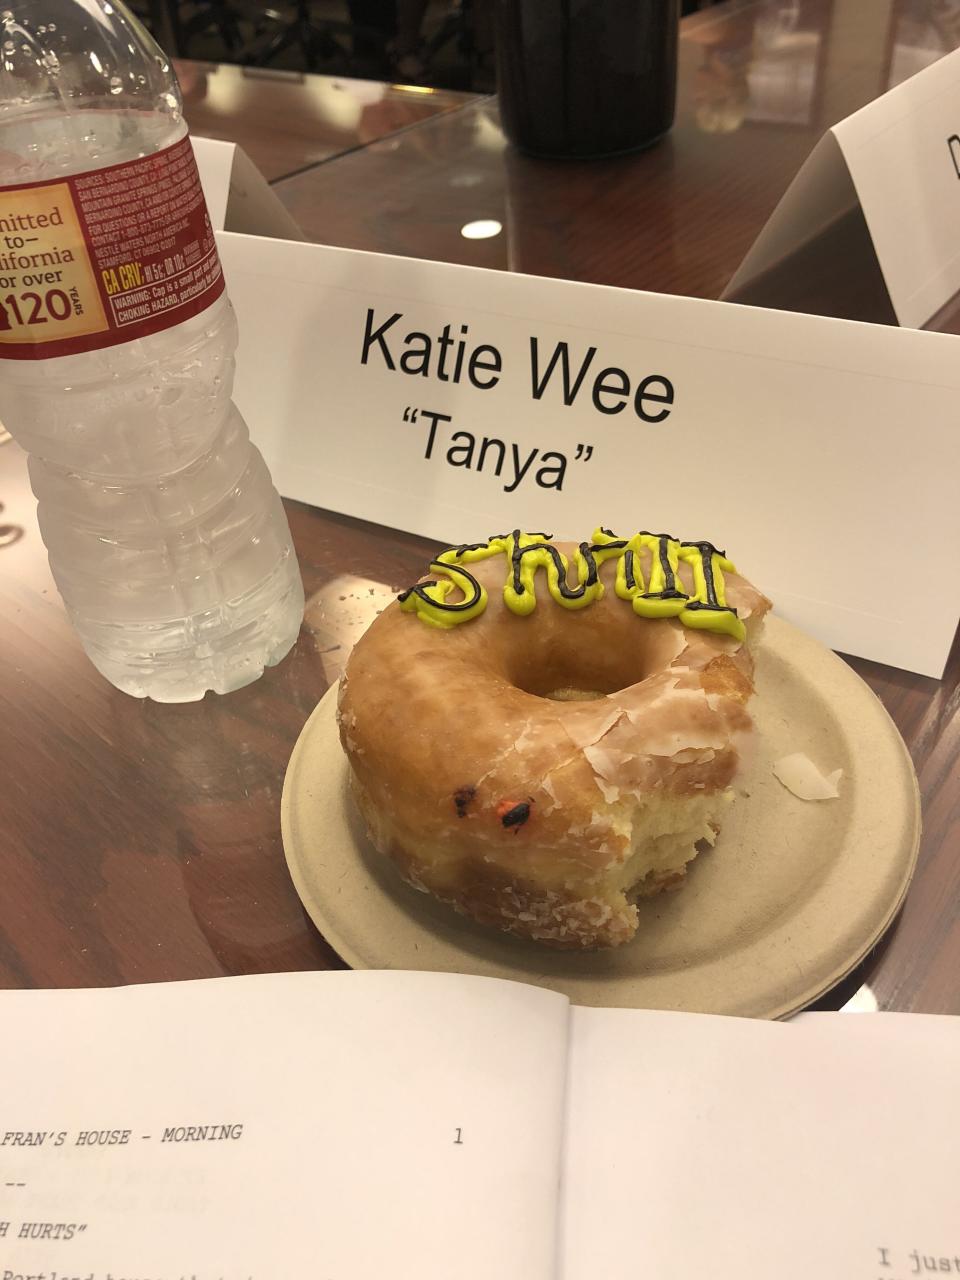 My place at the table during the table read. (Photo: Courtesy of Katie Wee)